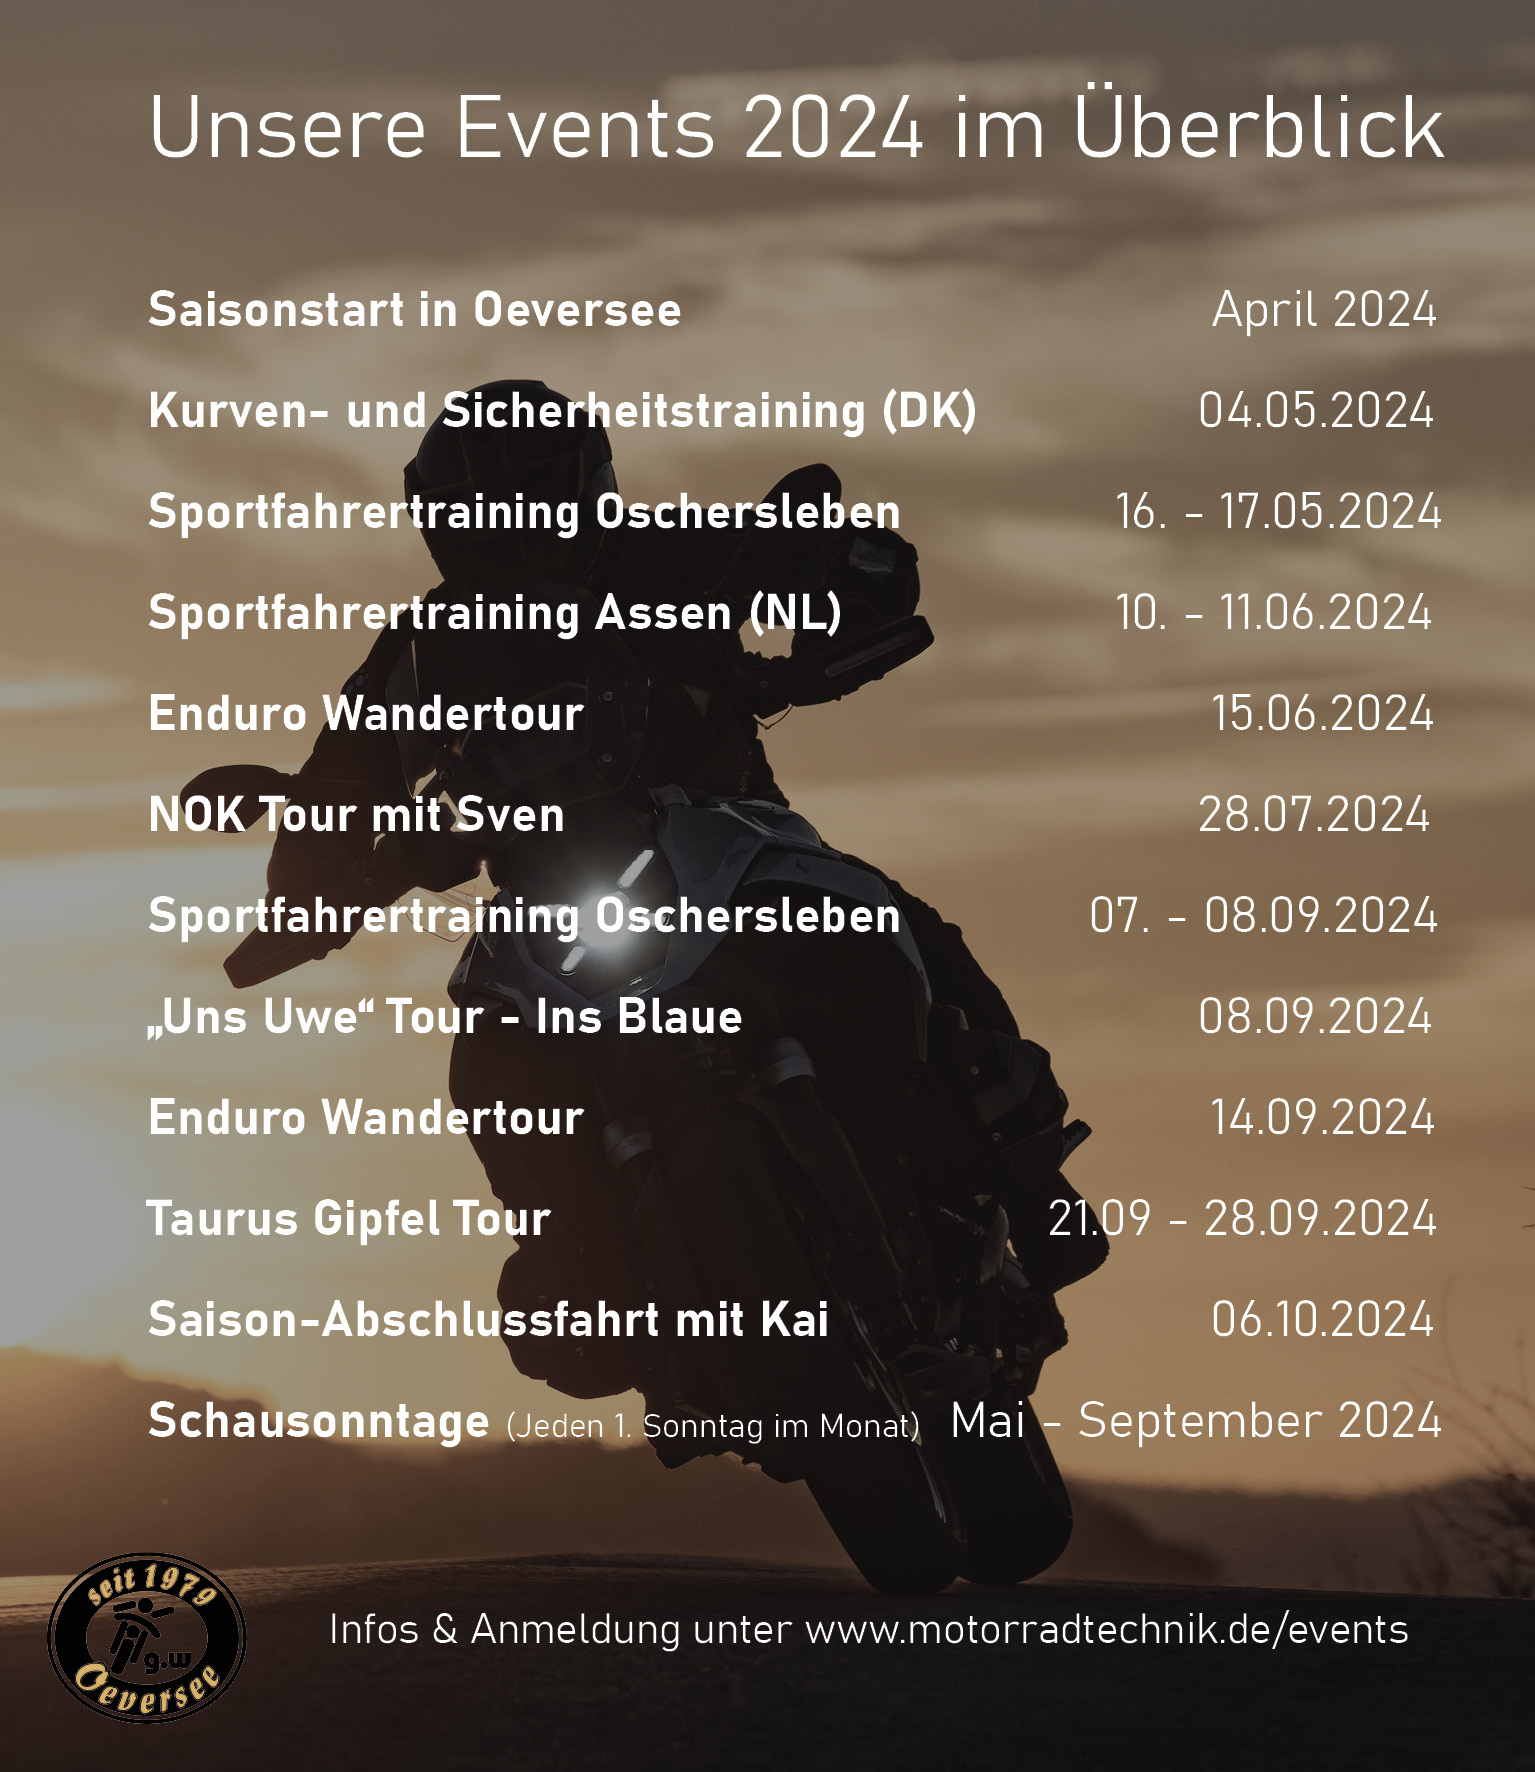 Unsere Events 2024